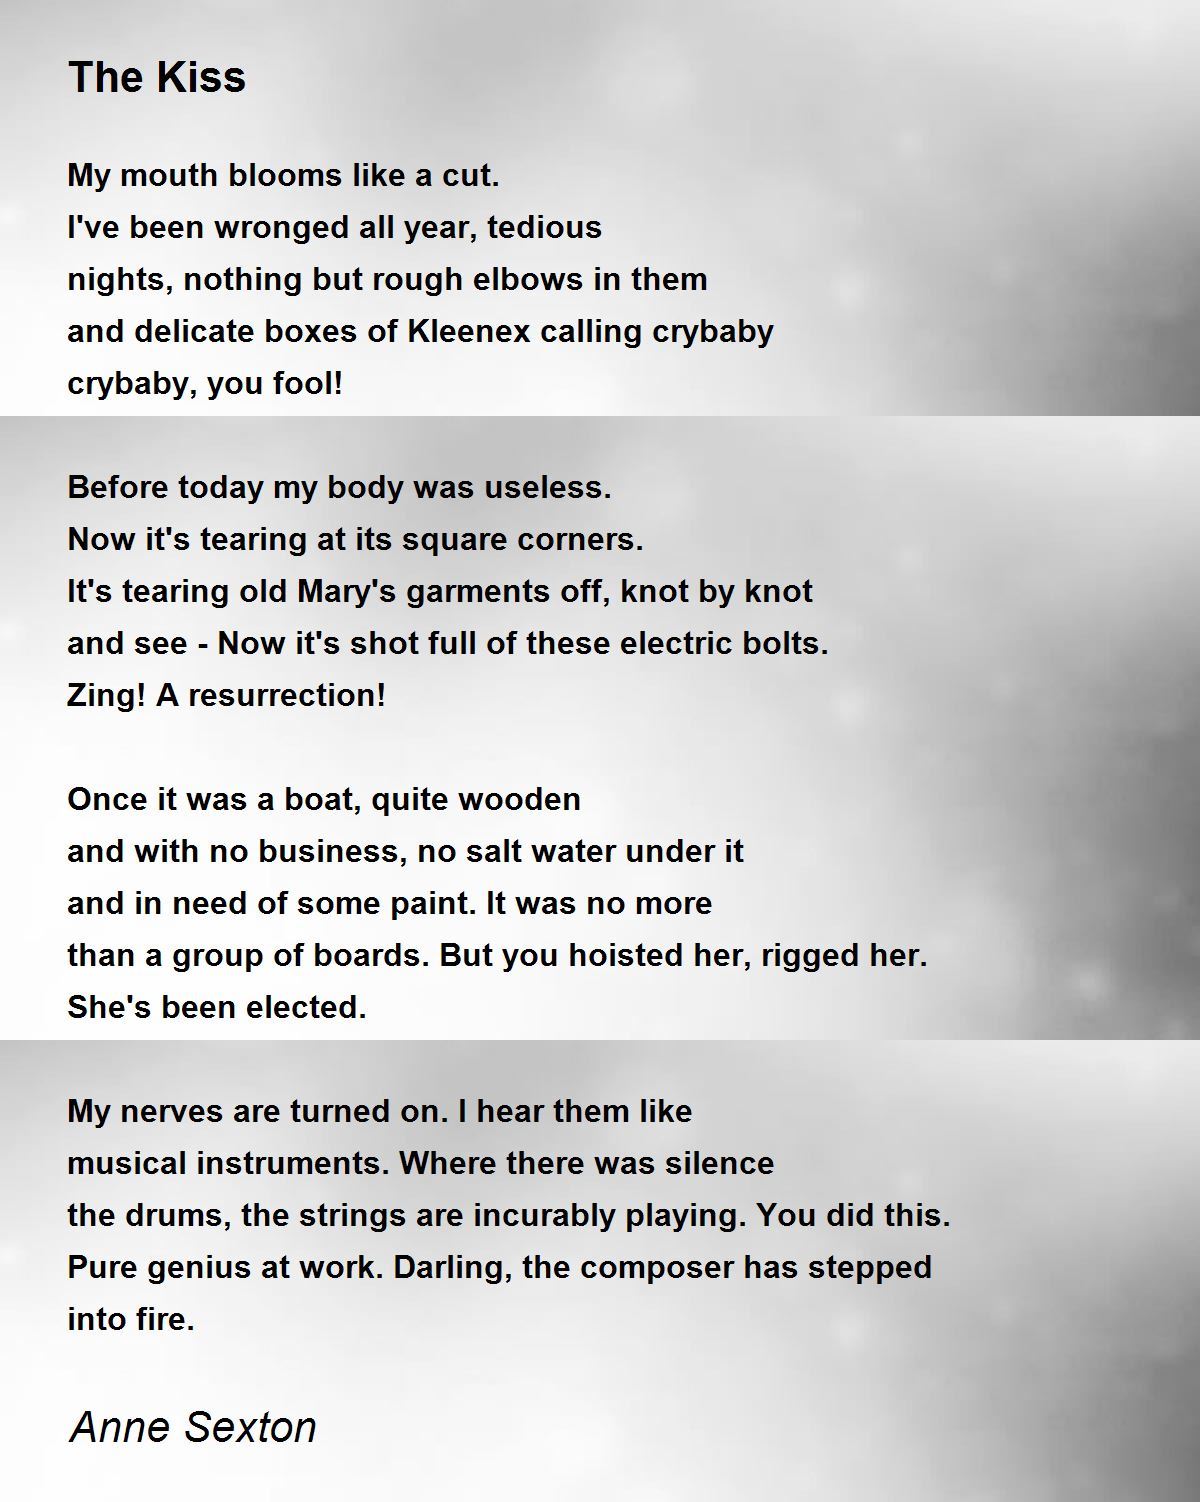 The Kiss Poem by Anne Sexton - Poem Hunter